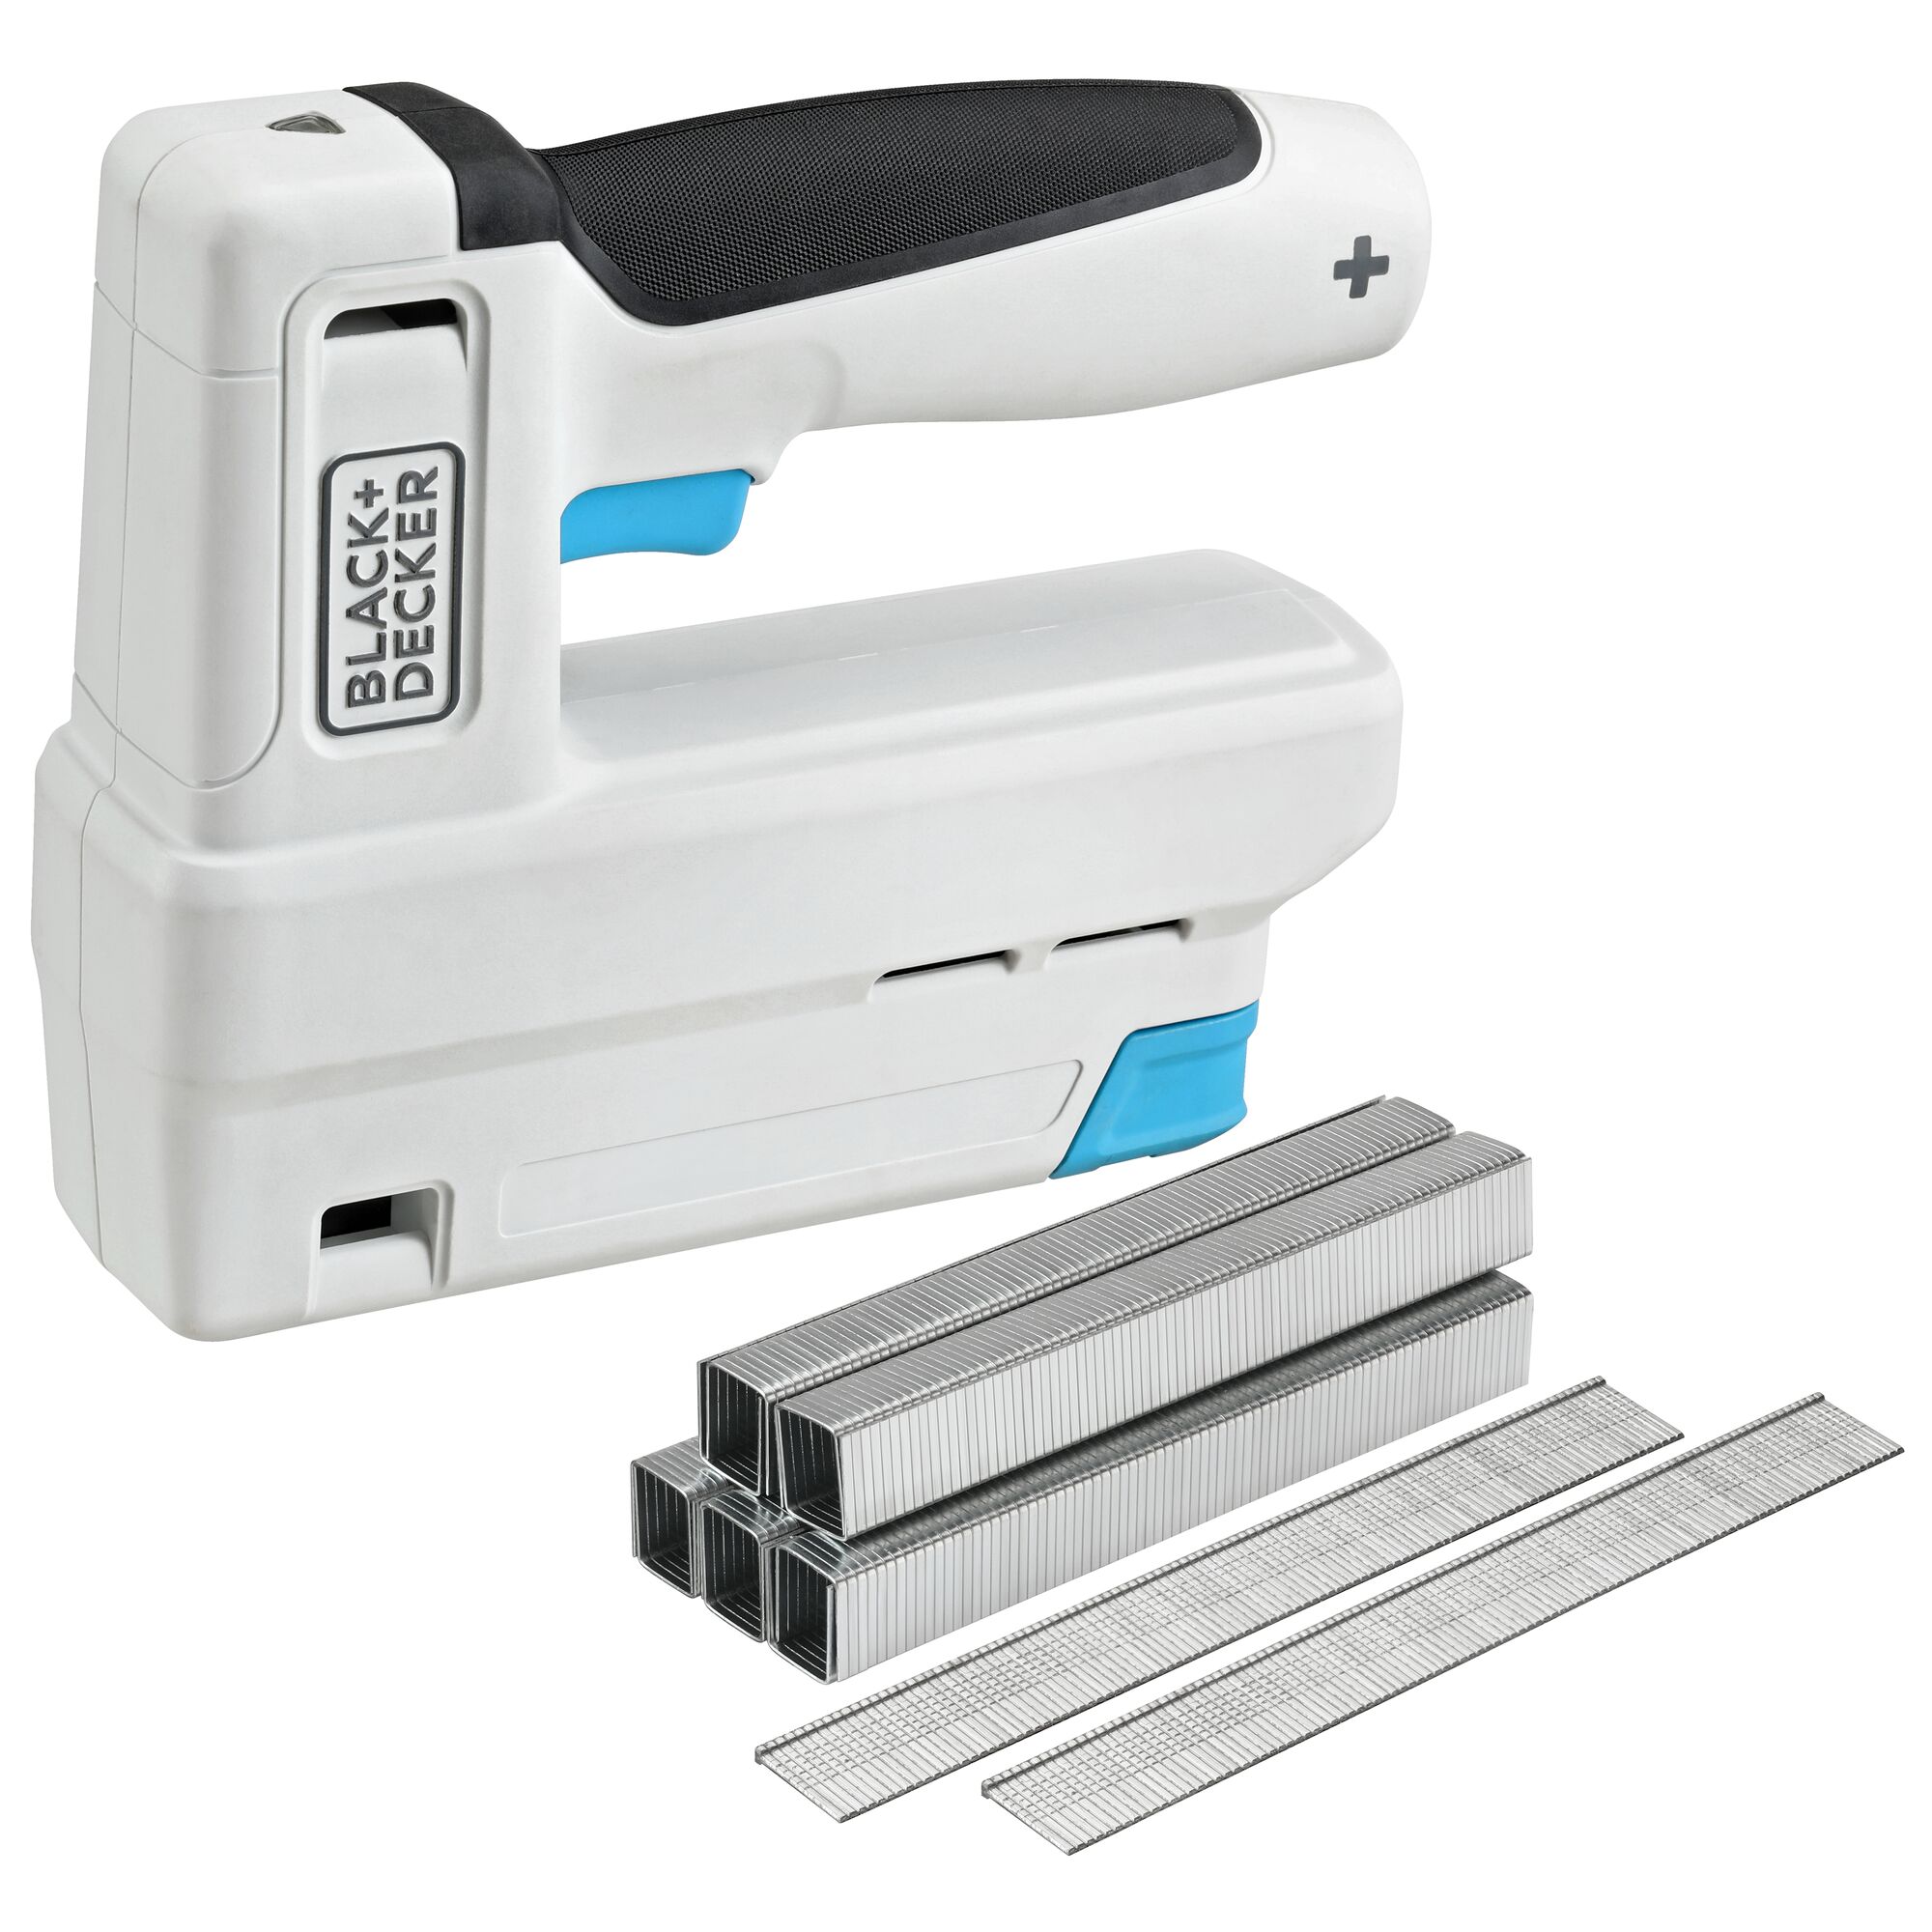 BLACK+DECKER cordless power stapler with the 800 staples and 200 brad nails that are included with purchase